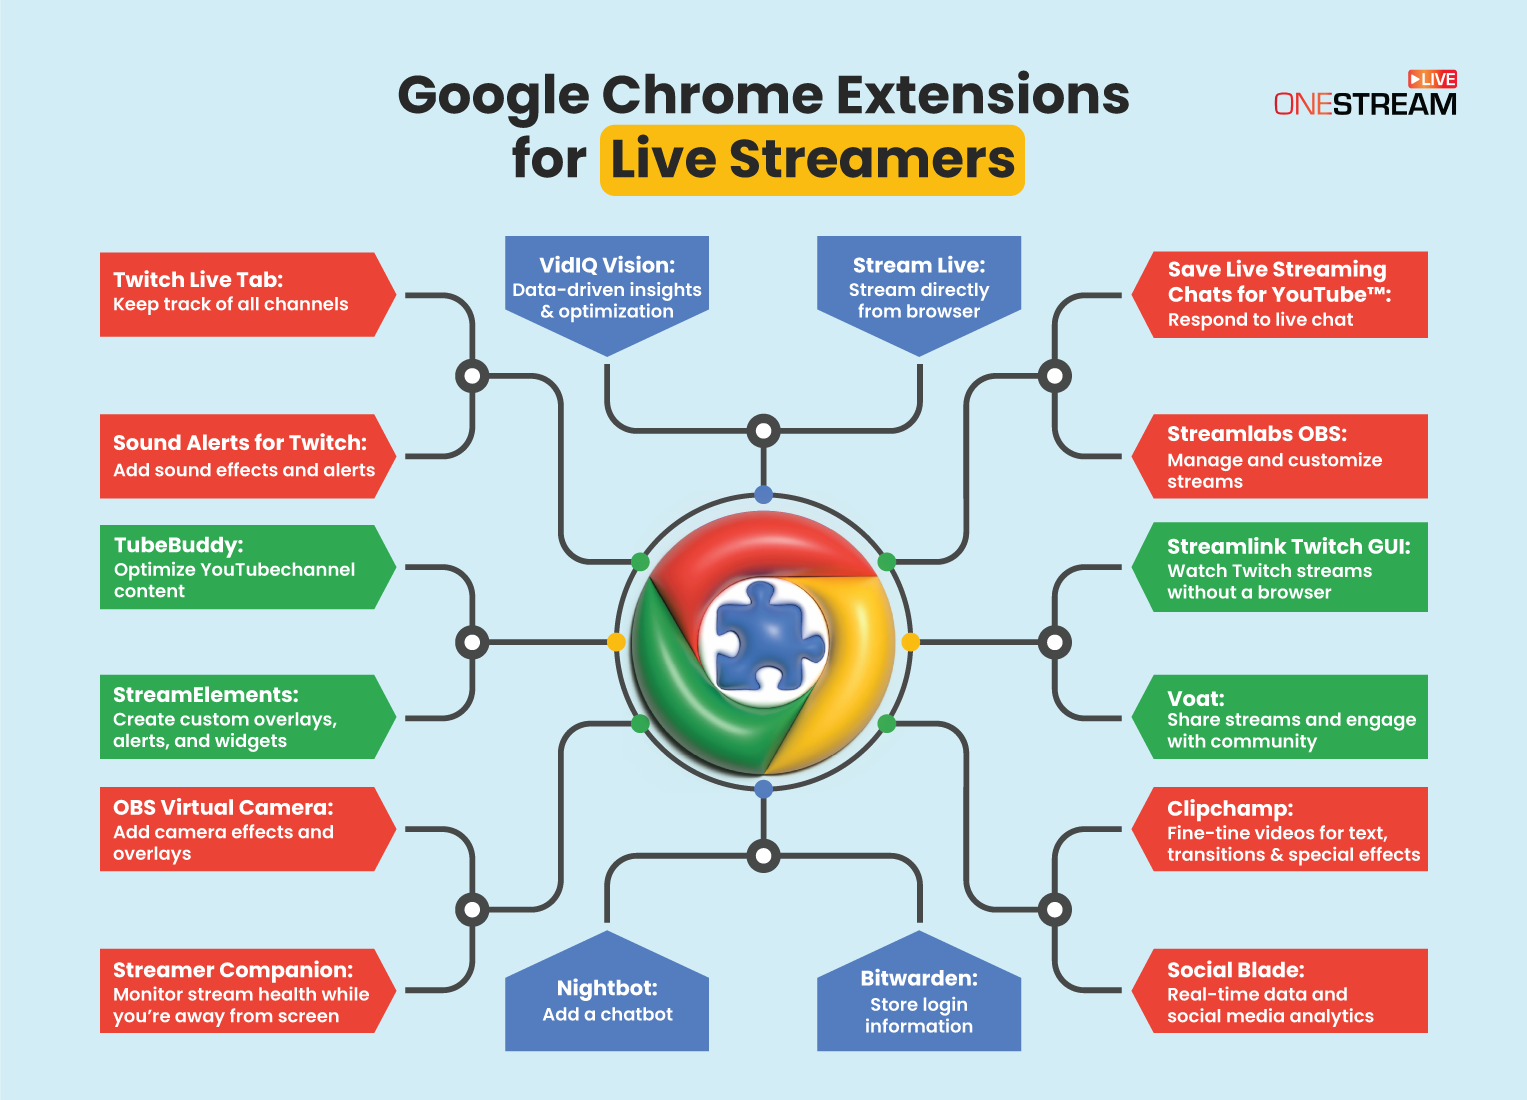 Top Google Chrome Extensions for Live Streamers